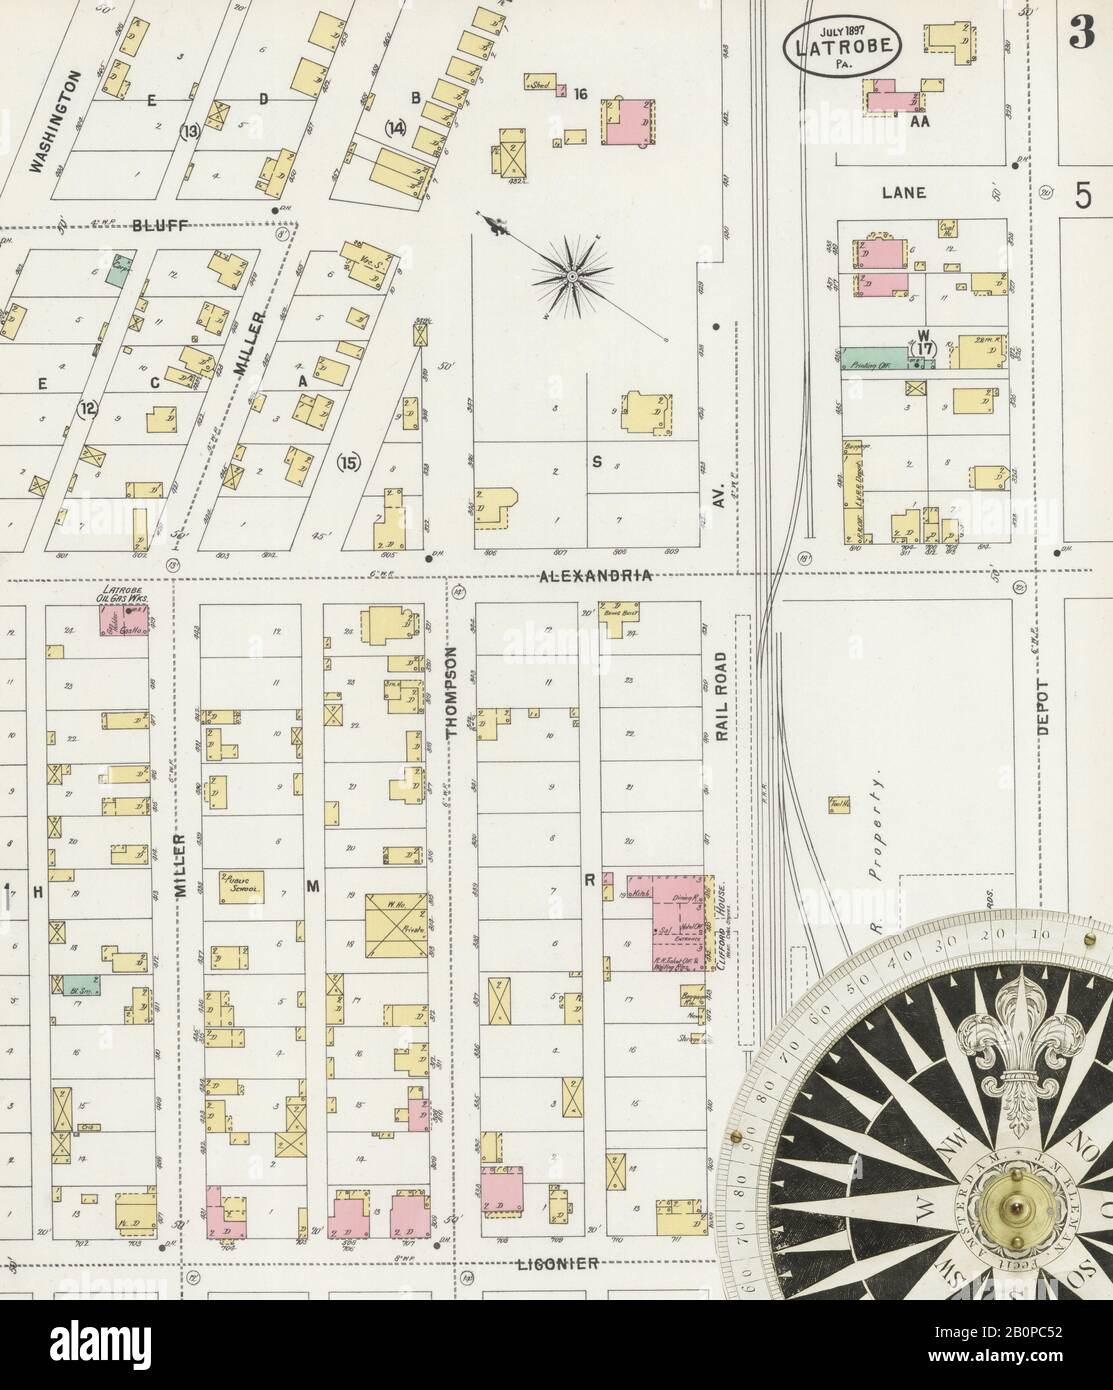 Image 3 of Sanborn Fire Insurance Map from Latrobe, Westmoreland County, Pennsylvania. Jul 1897. 14 Sheet(s), America, street map with a Nineteenth Century compass Stock Photo